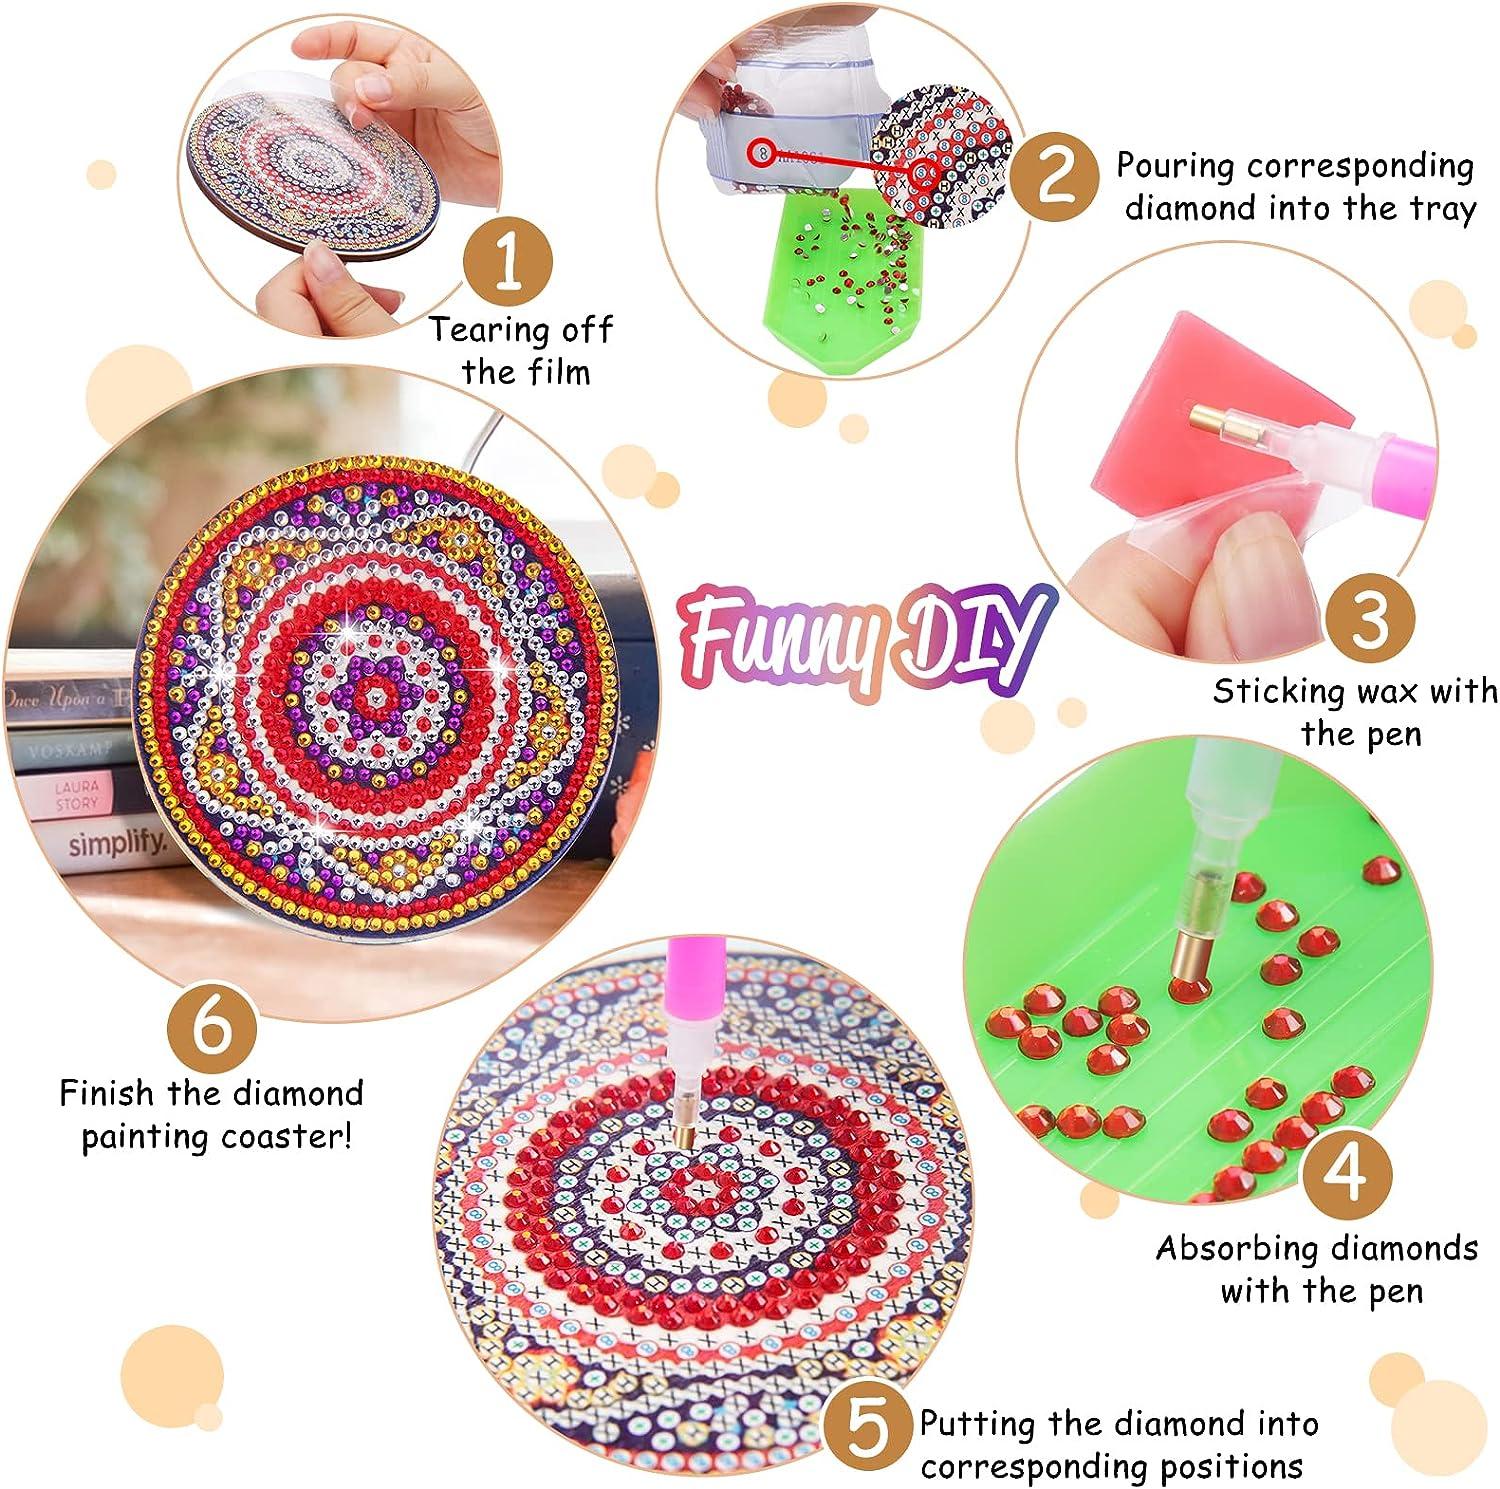 8 Pieces Diamond Painting Coasters with Holder DIY Mandala Coasters Diamond  Painting Kits Diamond Art Coasters Kit Diamond Non Slip Coaster for